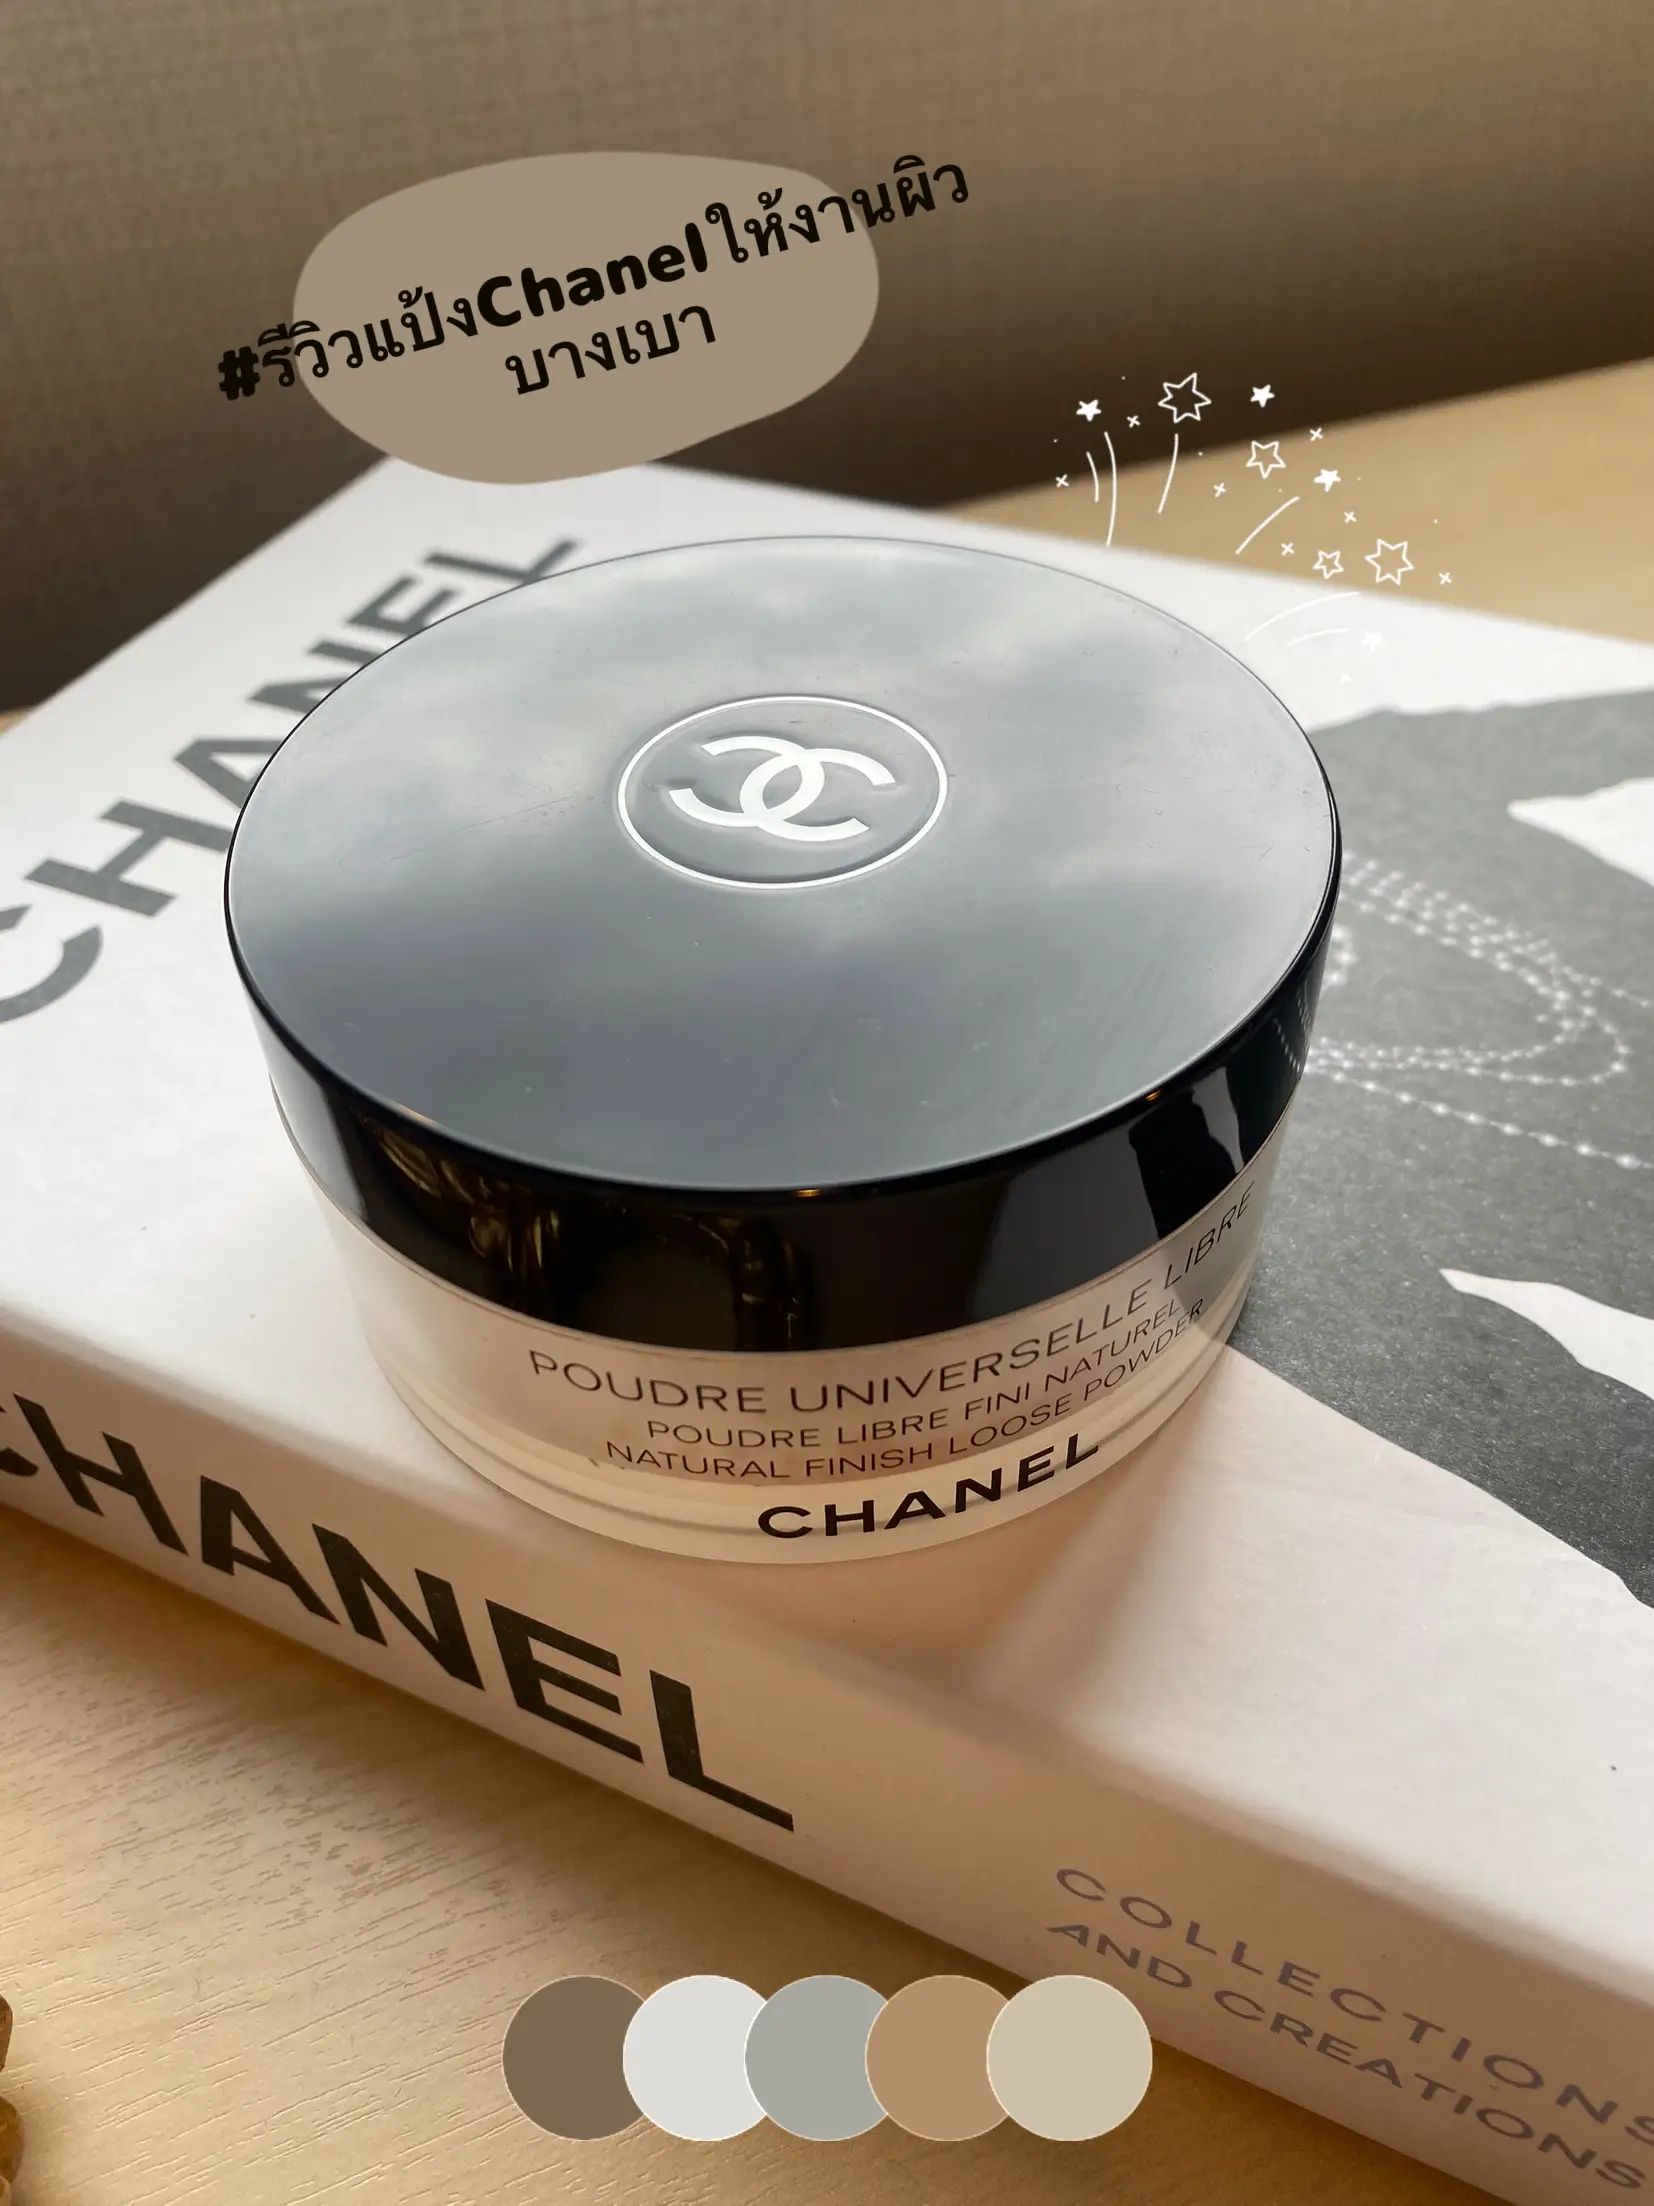 Light Chanel talcum powder review gives expensive skin work🥰👏🏻, Gallery  posted by 𝐾．𝐾𝑒𝑡𝑡𝑖𝑝